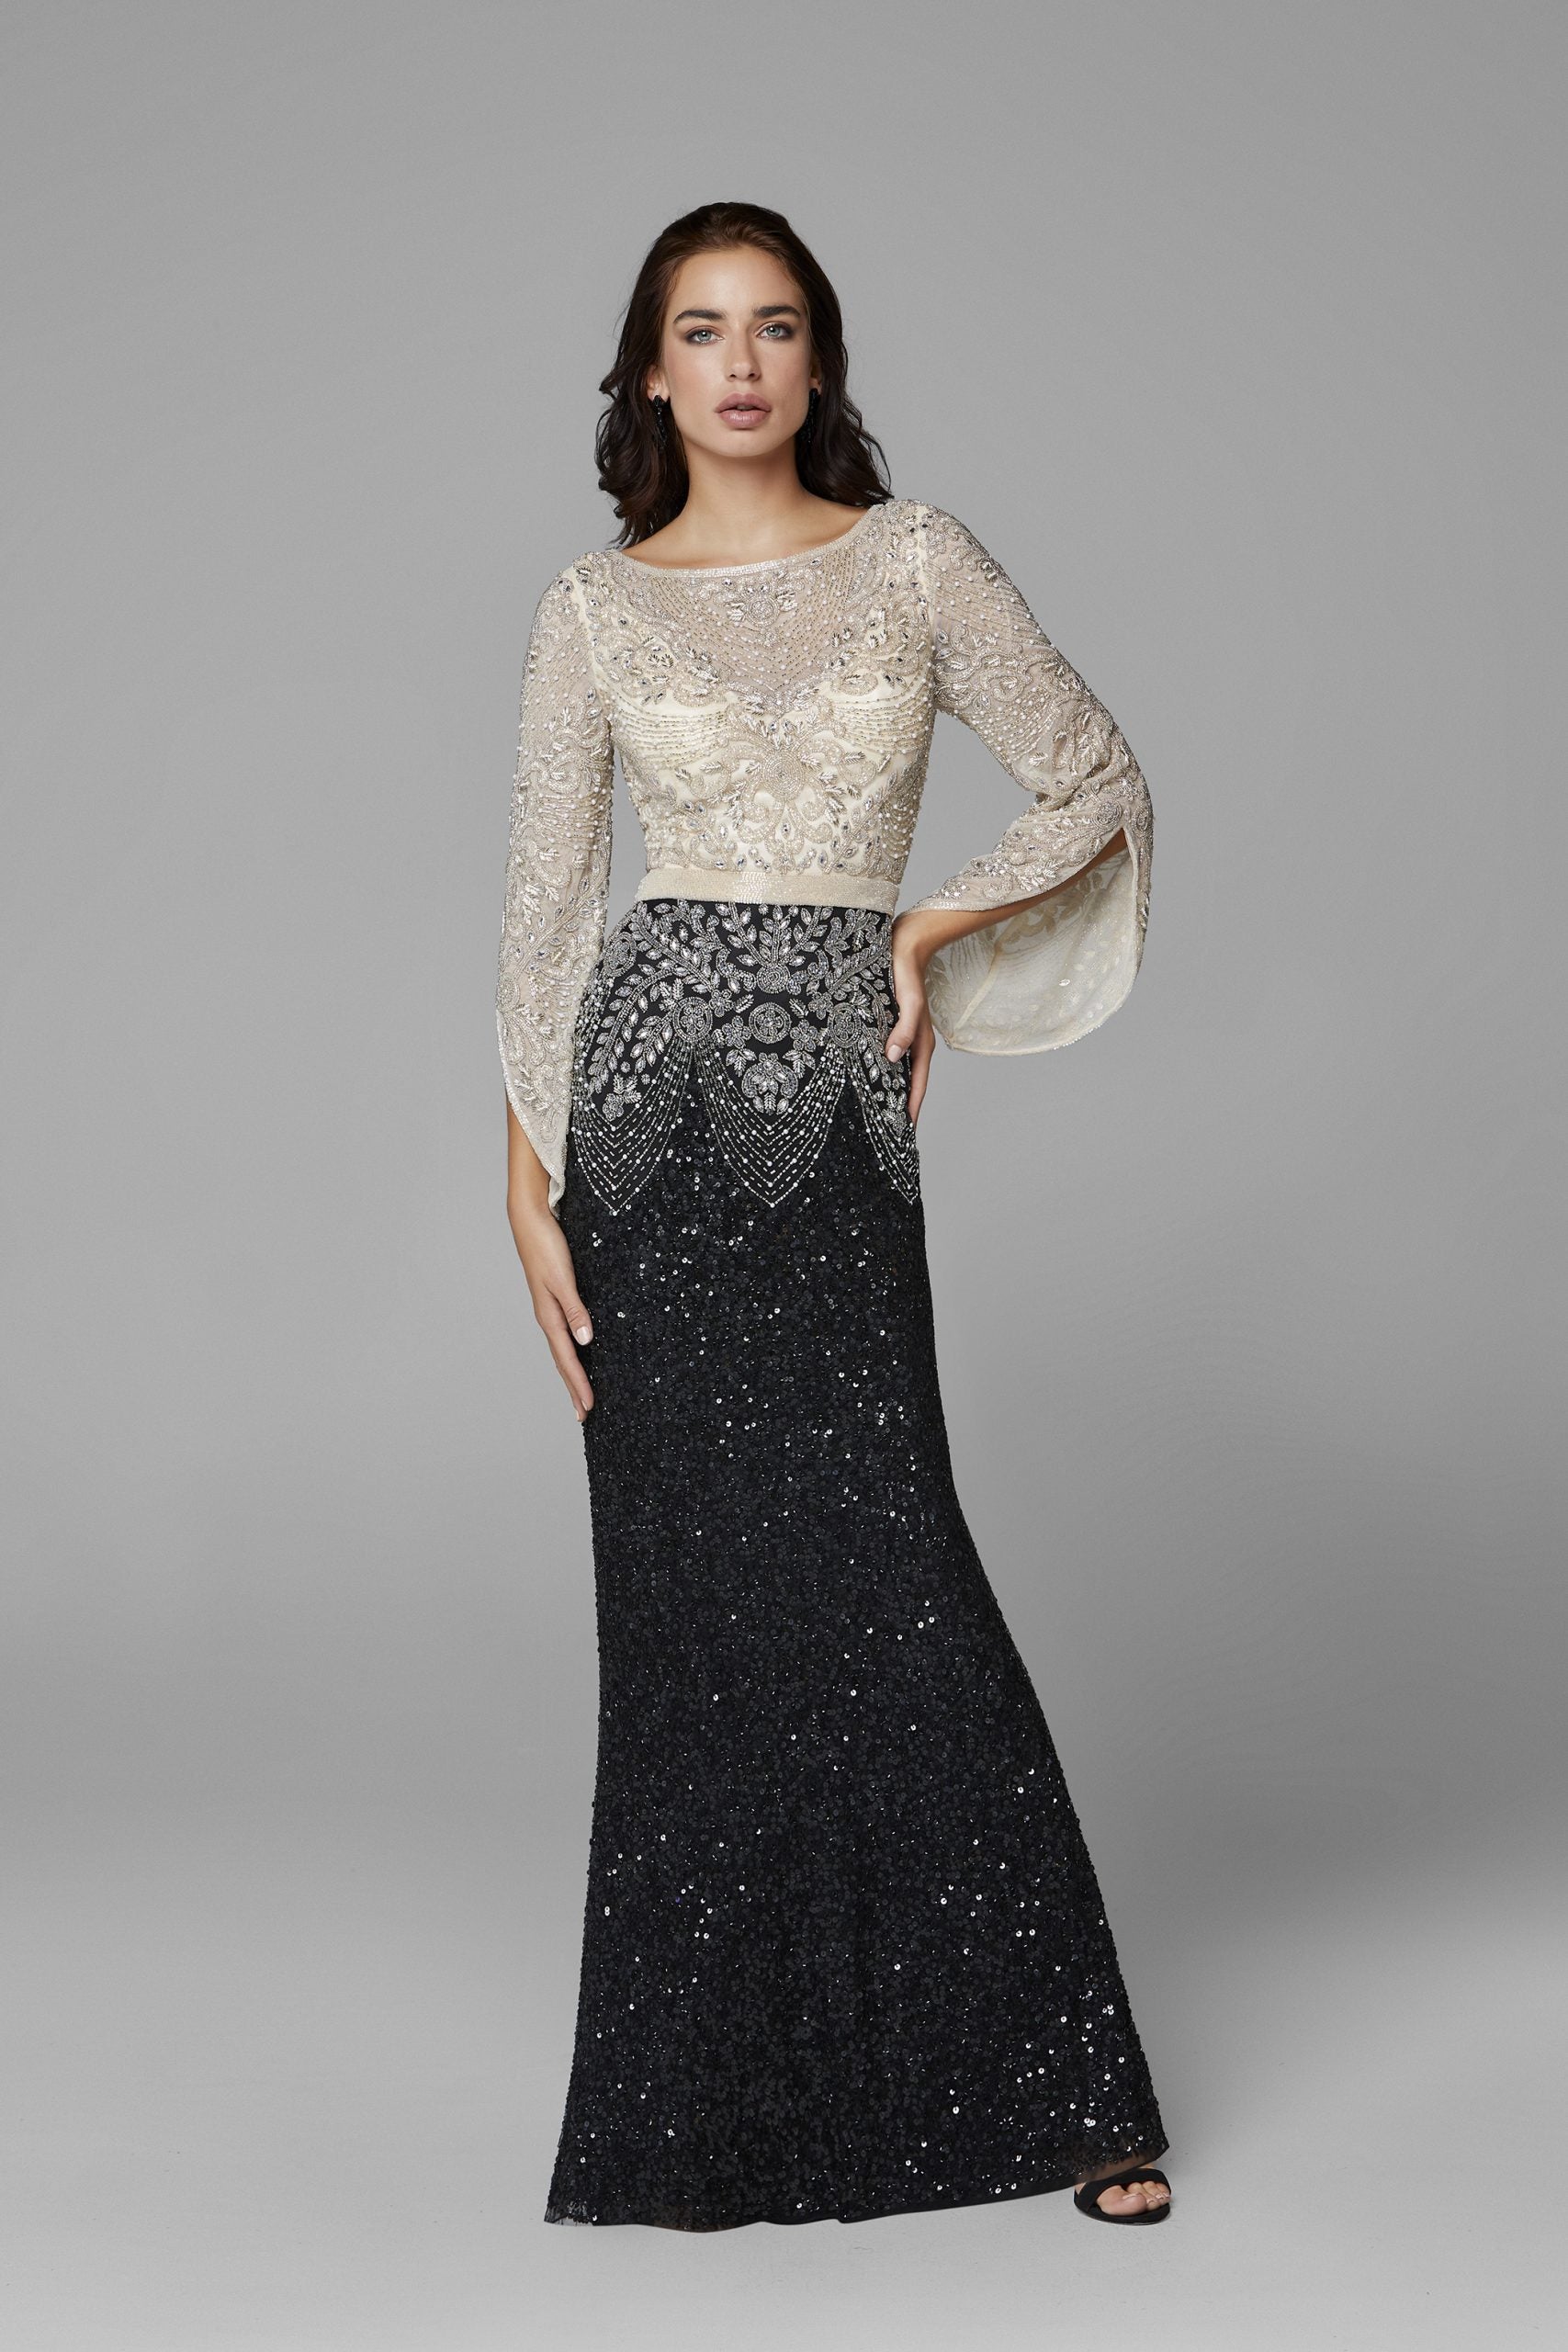 Primavera Couture 3680 This is a long hand beaded evening gown with a bateau neckline and sheer long embellished bell sleeves. It is multi colored and fitted to the floor with an embellished waistline. Available colors:  Black Nude, Charcoal Gold, Forest Green  Available sizes:  0-24